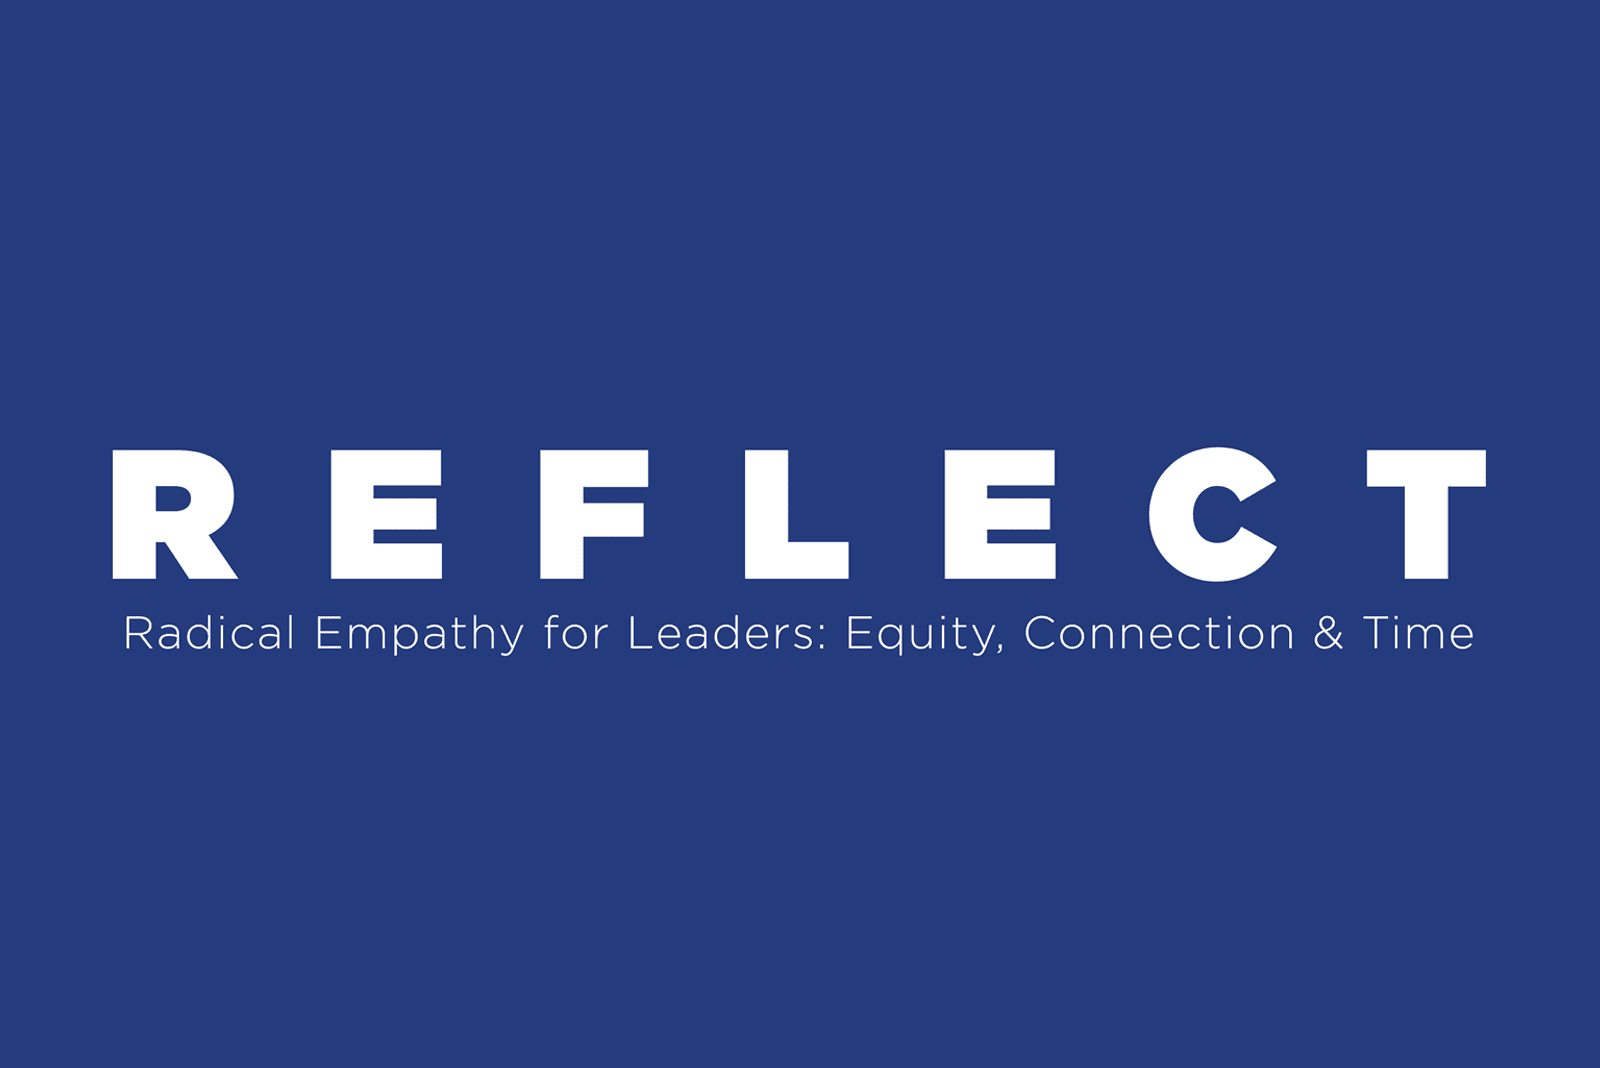 REFLECT: Radical Empathy for Leaders: Equity, Connection & Time